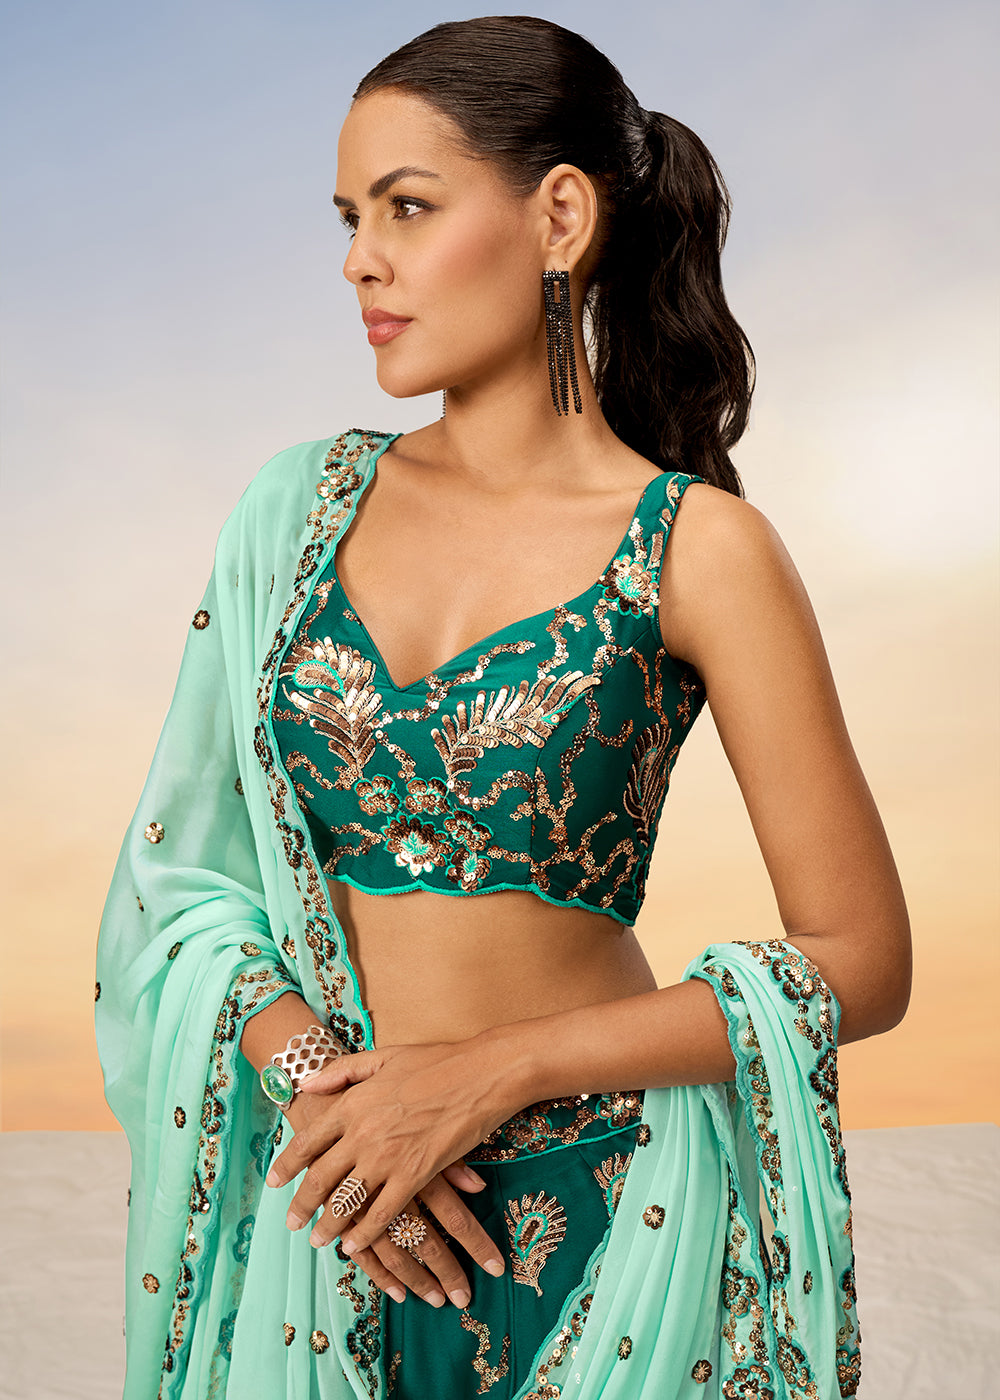 Buy Now Pretty Green Sequins Embroidered Designer Lehenga Choli Online in USA, UK, Canada & Worldwide at Empress Clothing.